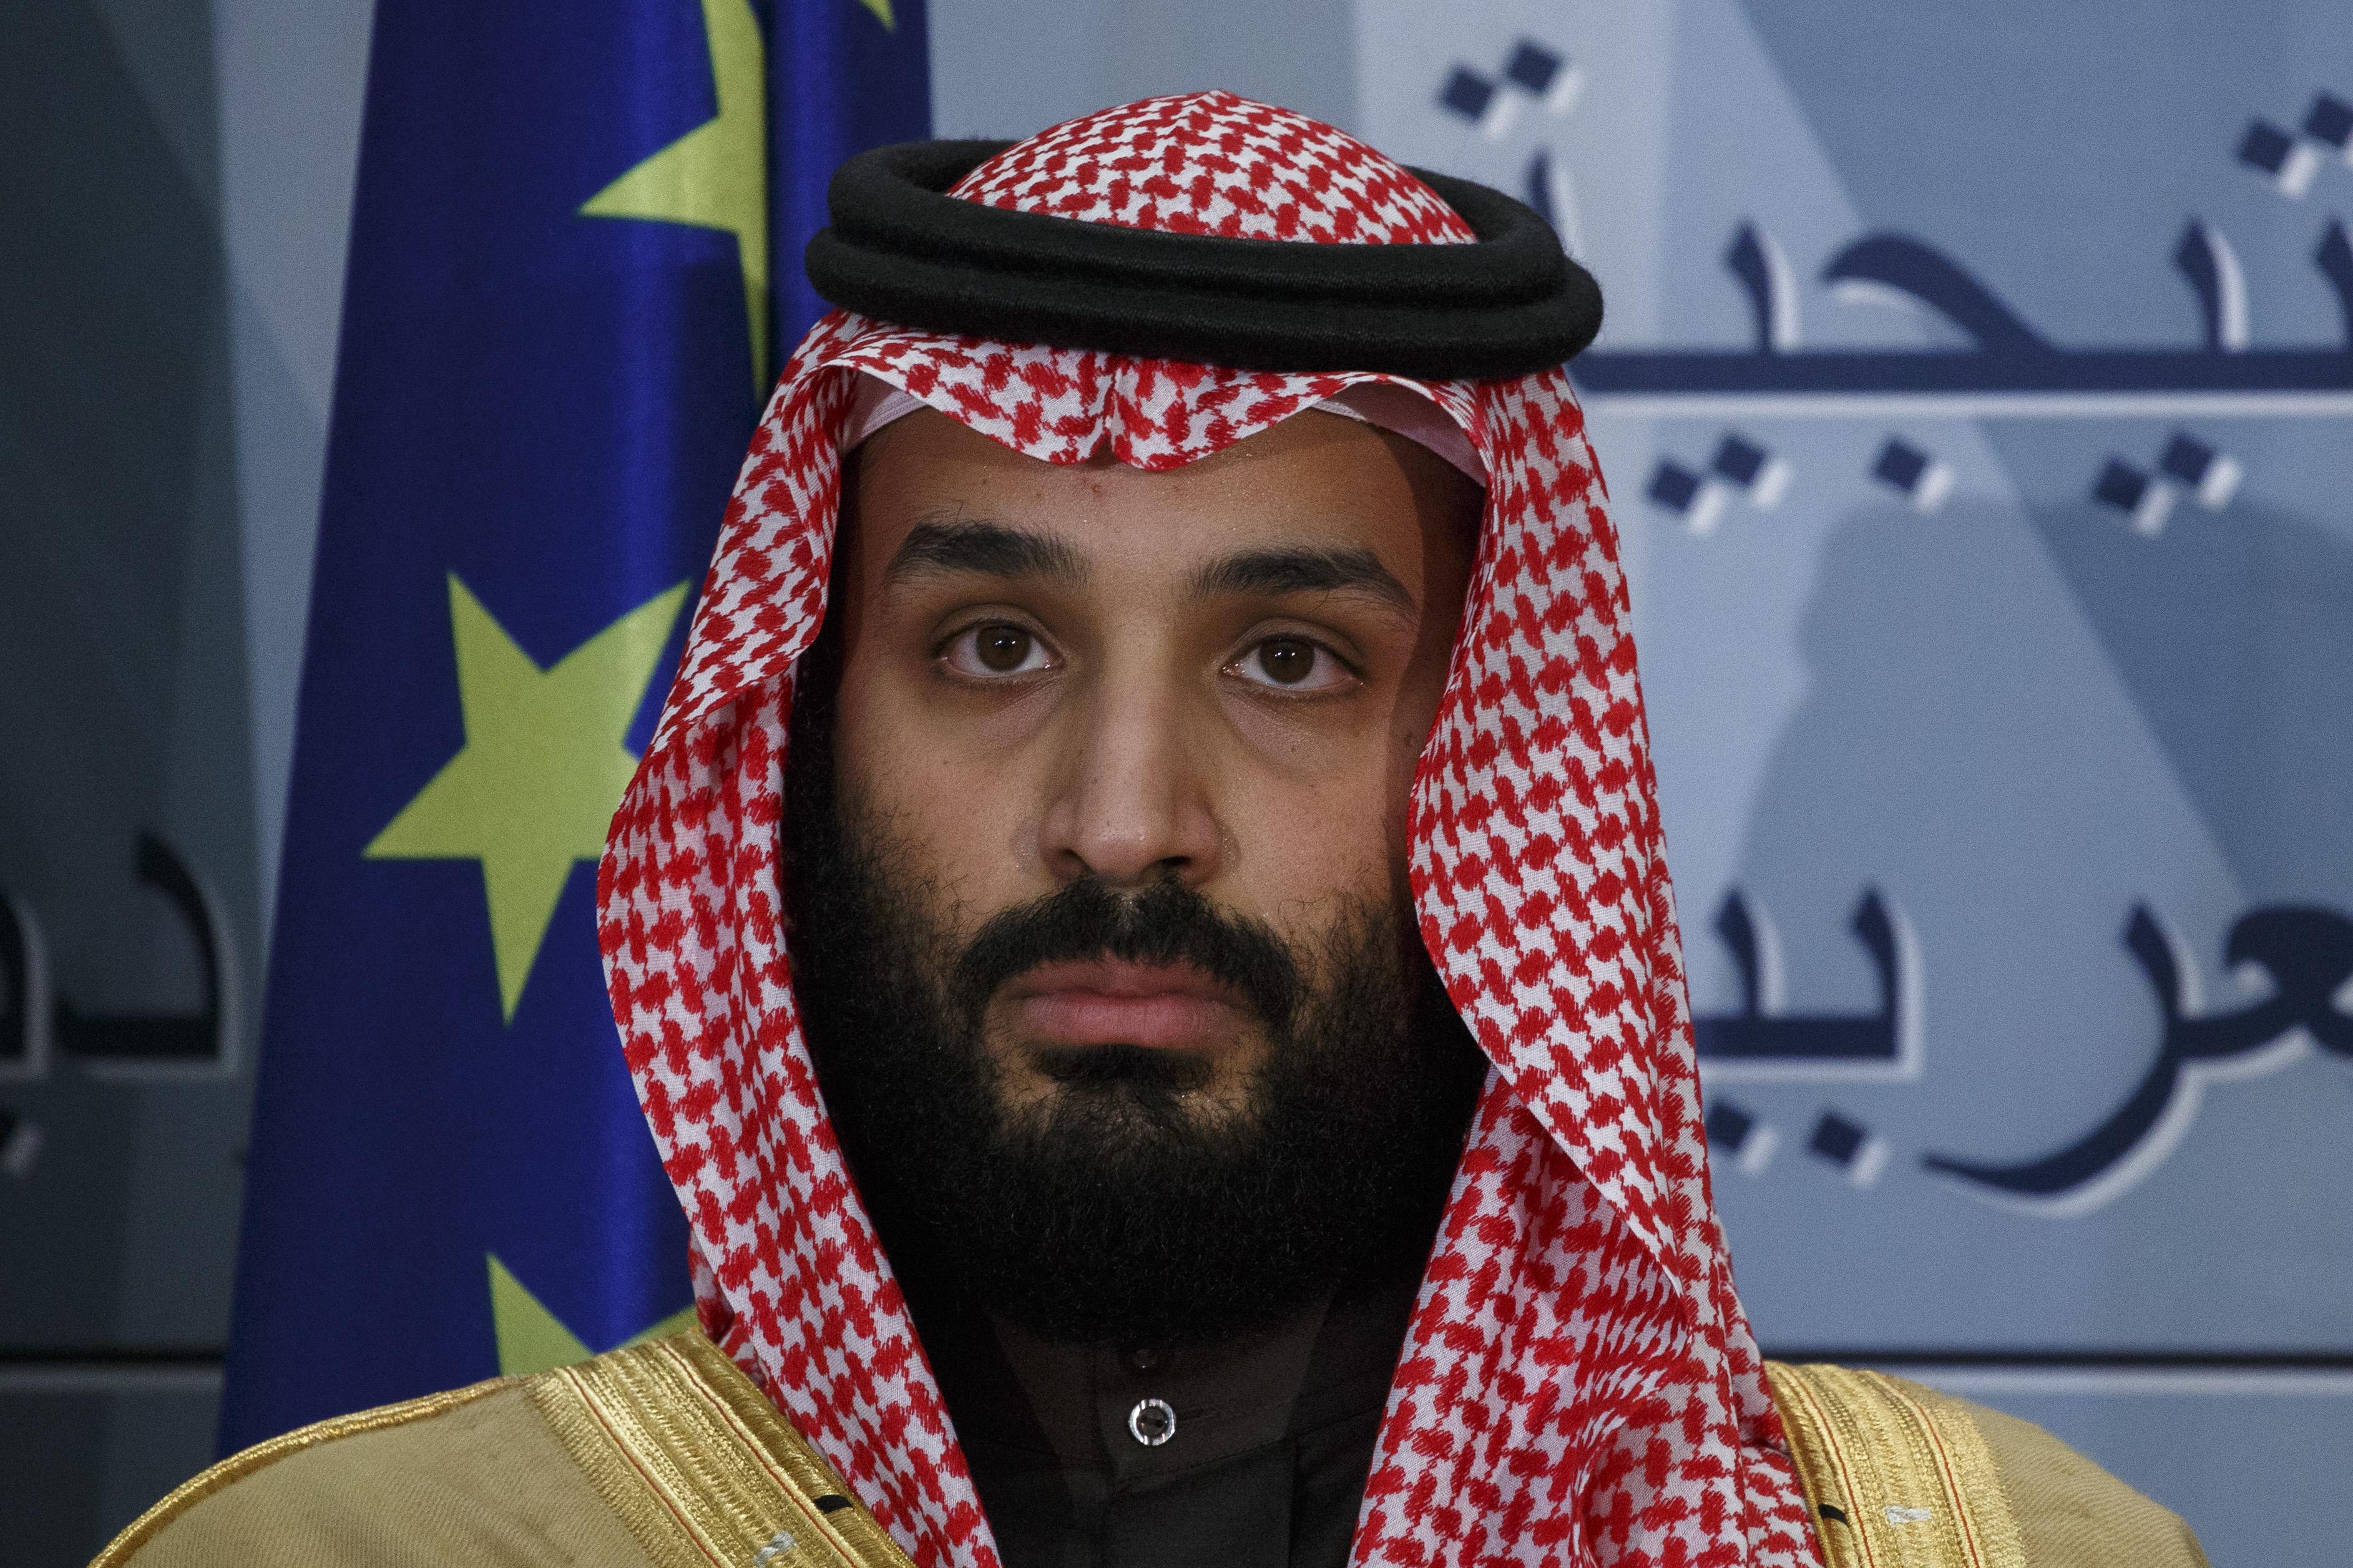 Saudi Arabia Crown Prince Mohammed bin Salman looks on during a ceremony at Moncloa Palace on April 12, 2018 in Madrid, Spain. (Pablo Blazquez Dominguez—Getty Images)